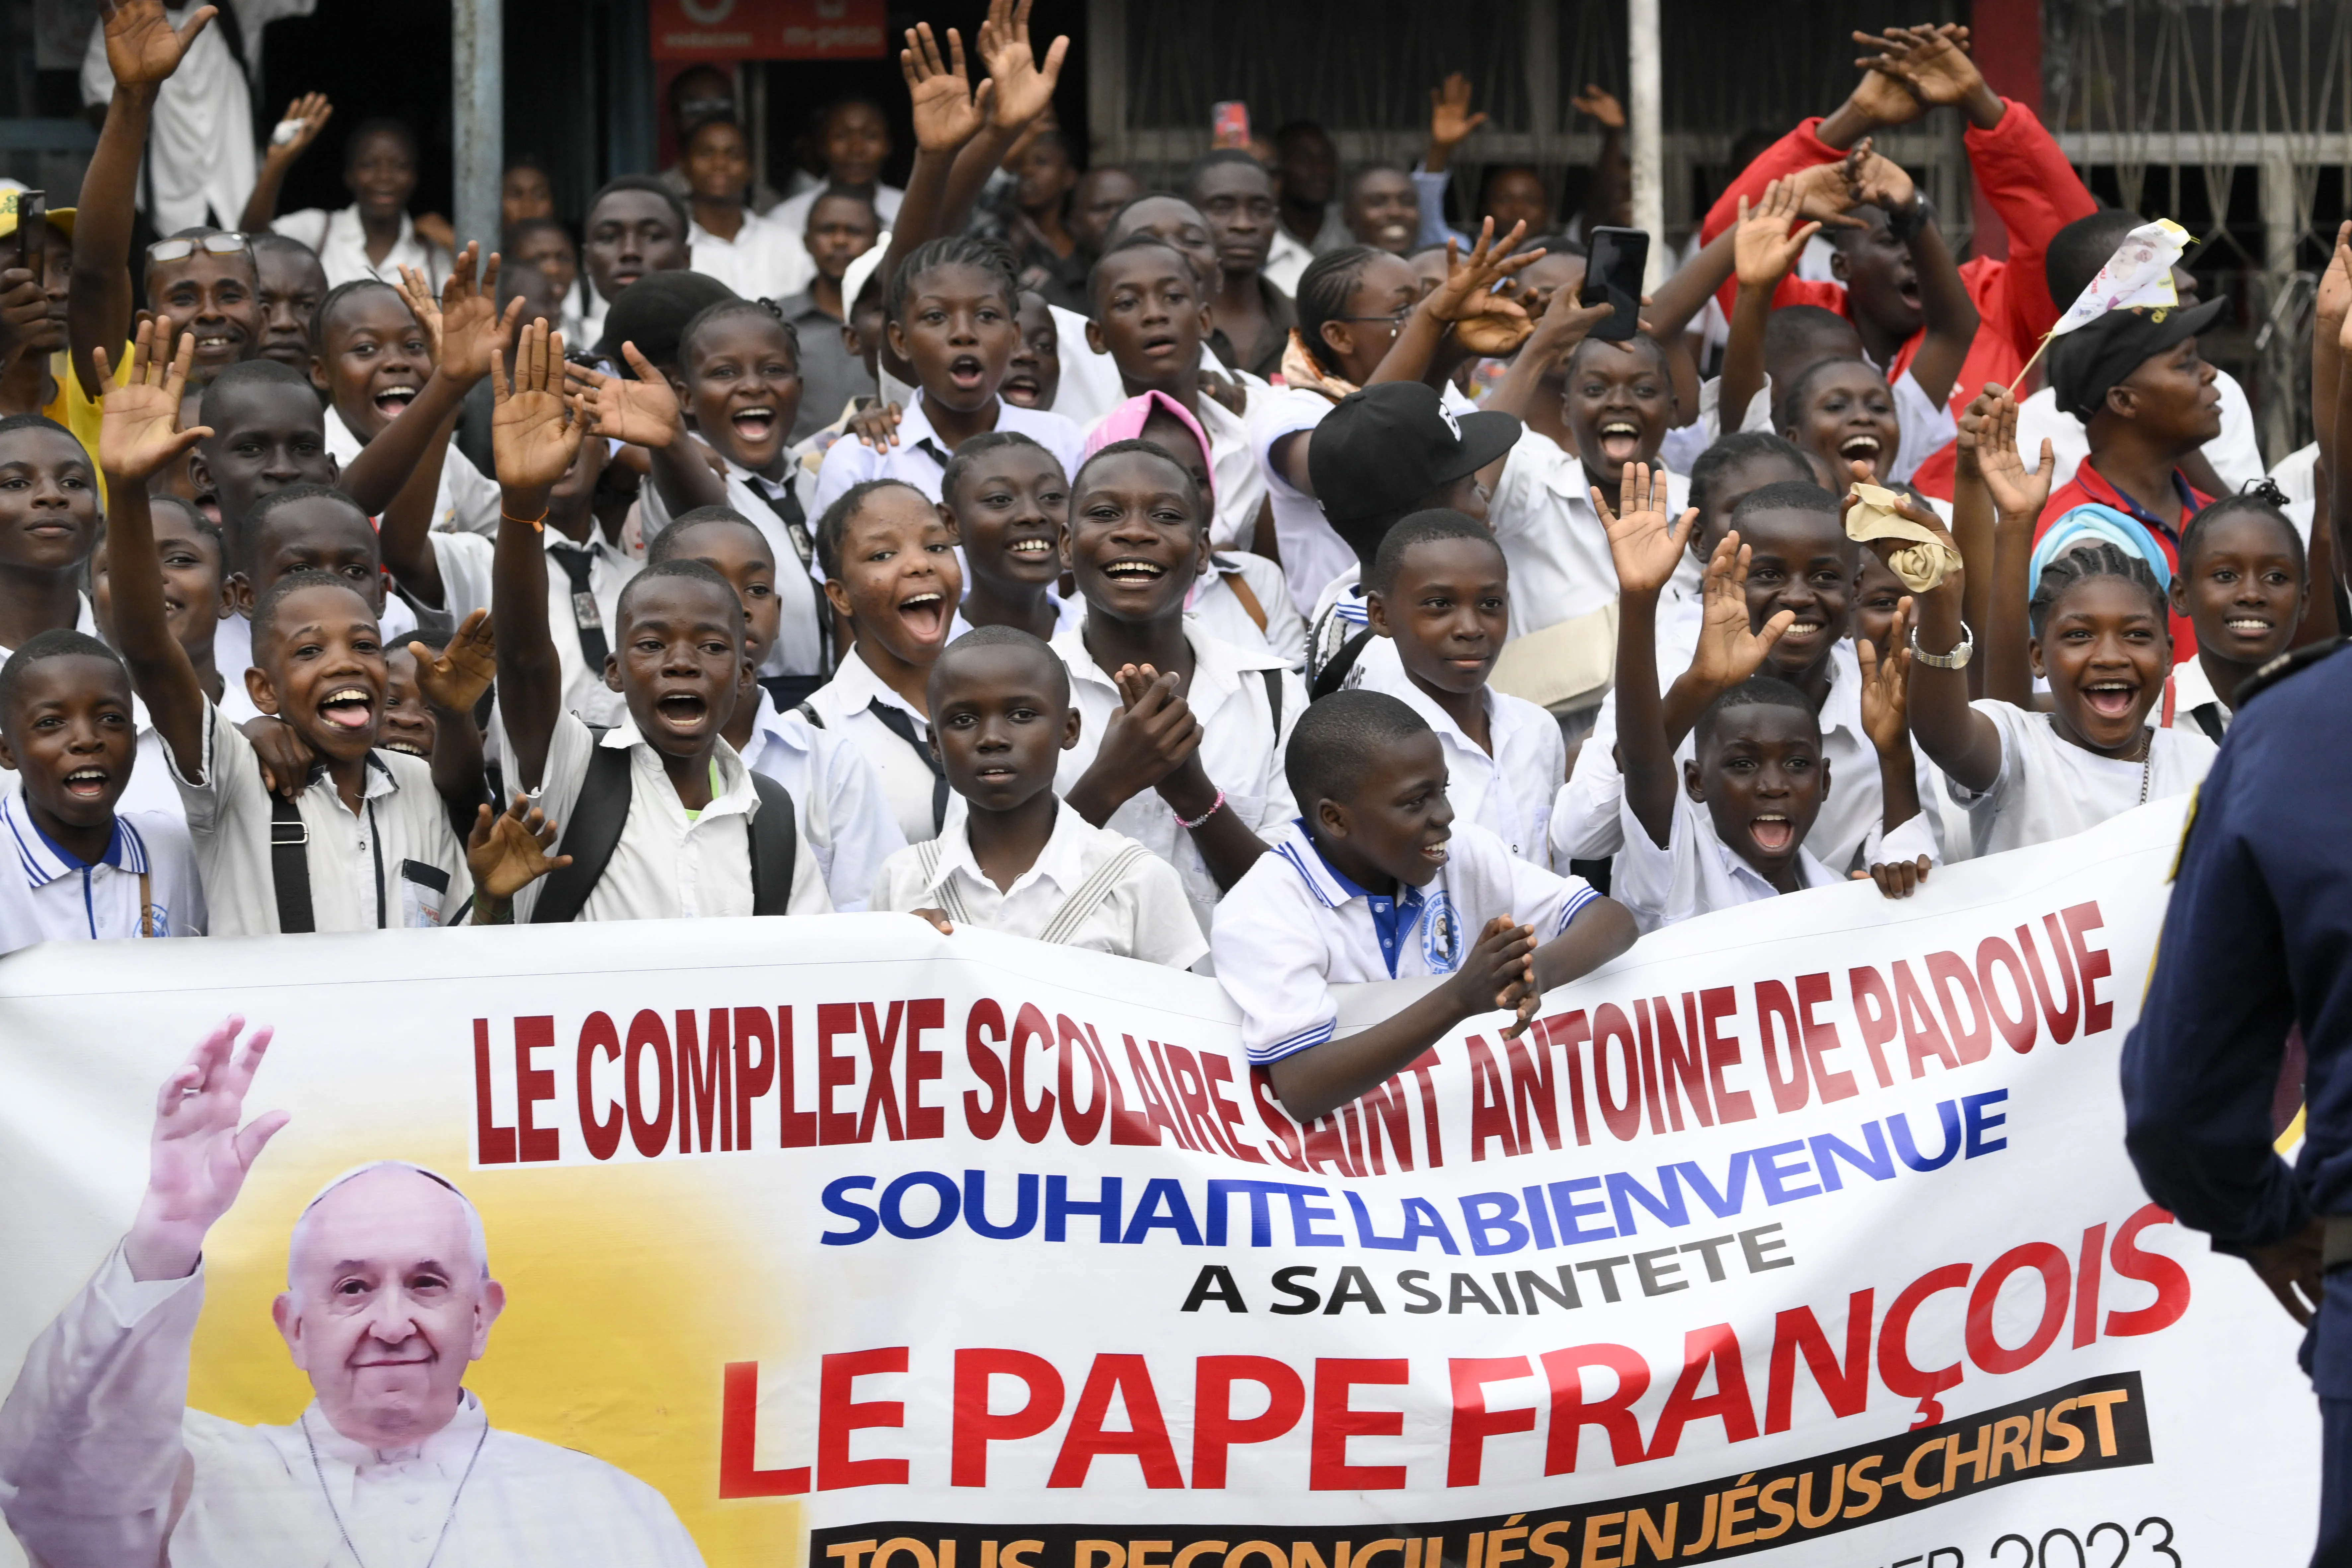 Pope Francis arrived in the Democratic Republic of Congo on Jan. 31, 2023. The streets of the pope’s five-mile drive from the N’Dolo Airport to the presidential residence were lined with thousands of locals who cheered and waved flags.?w=200&h=150